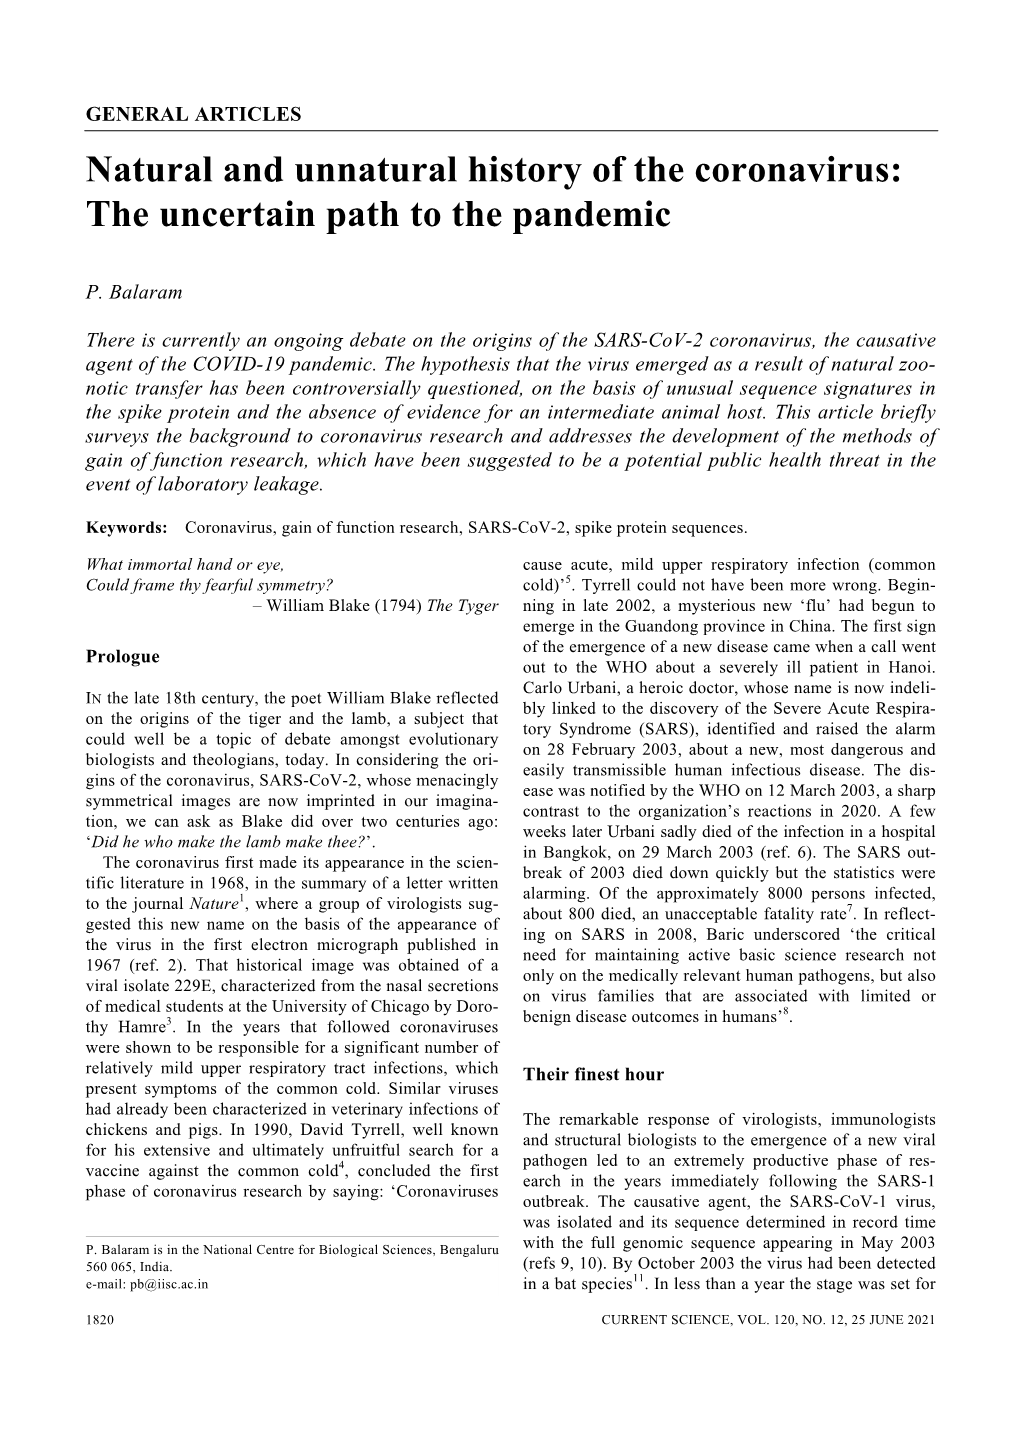 Natural and Unnatural History of the Coronavirus: the Uncertain Path to the Pandemic